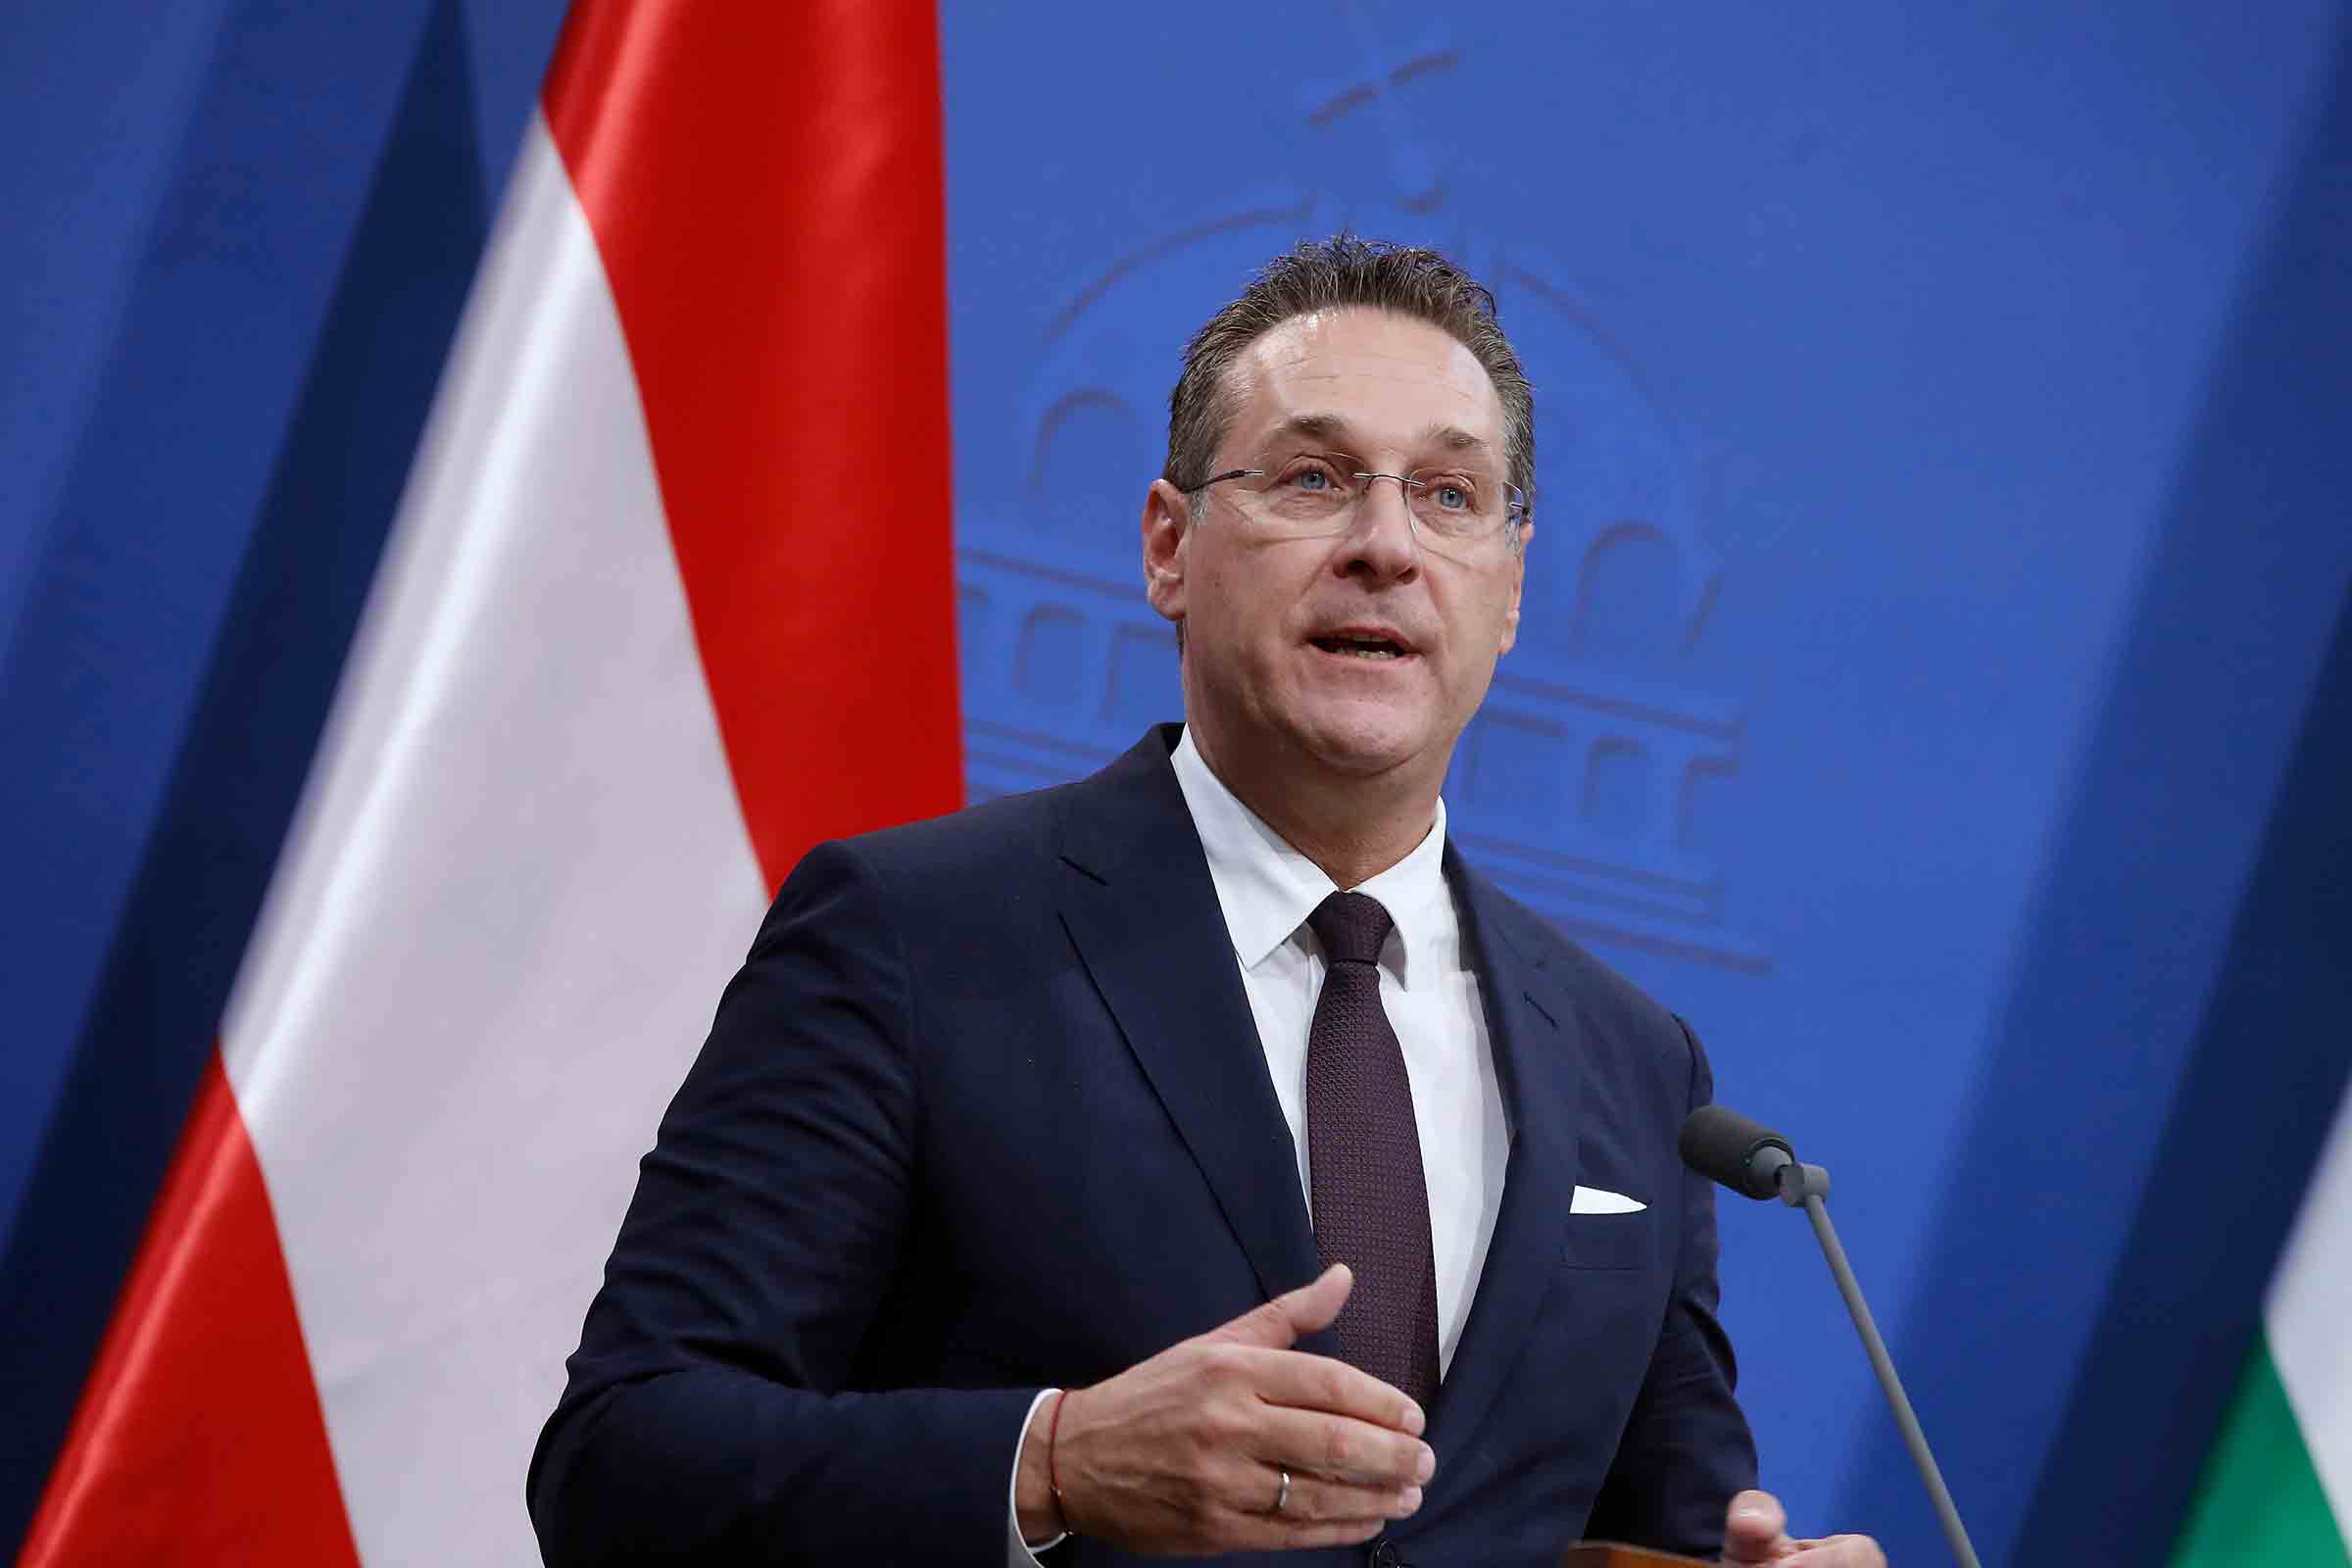 Austrian Vice Chancellor Heinz Christian Strache speaks during a press conference in Budapest, May 6, 2019.